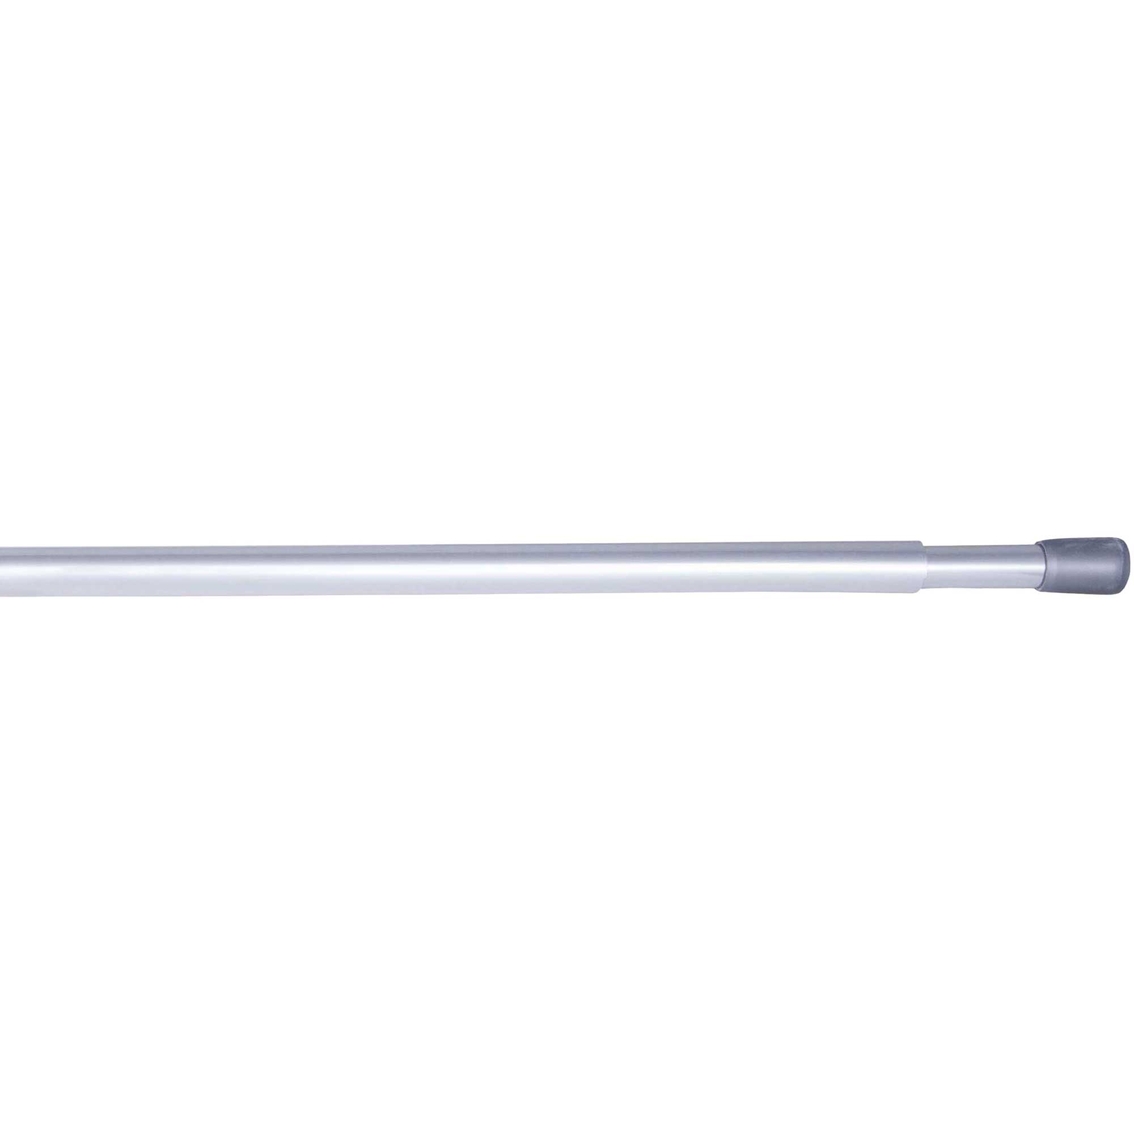 Simply Perfect Carlisle 5/8 in. Spring Tension Rod - Image 2 of 4